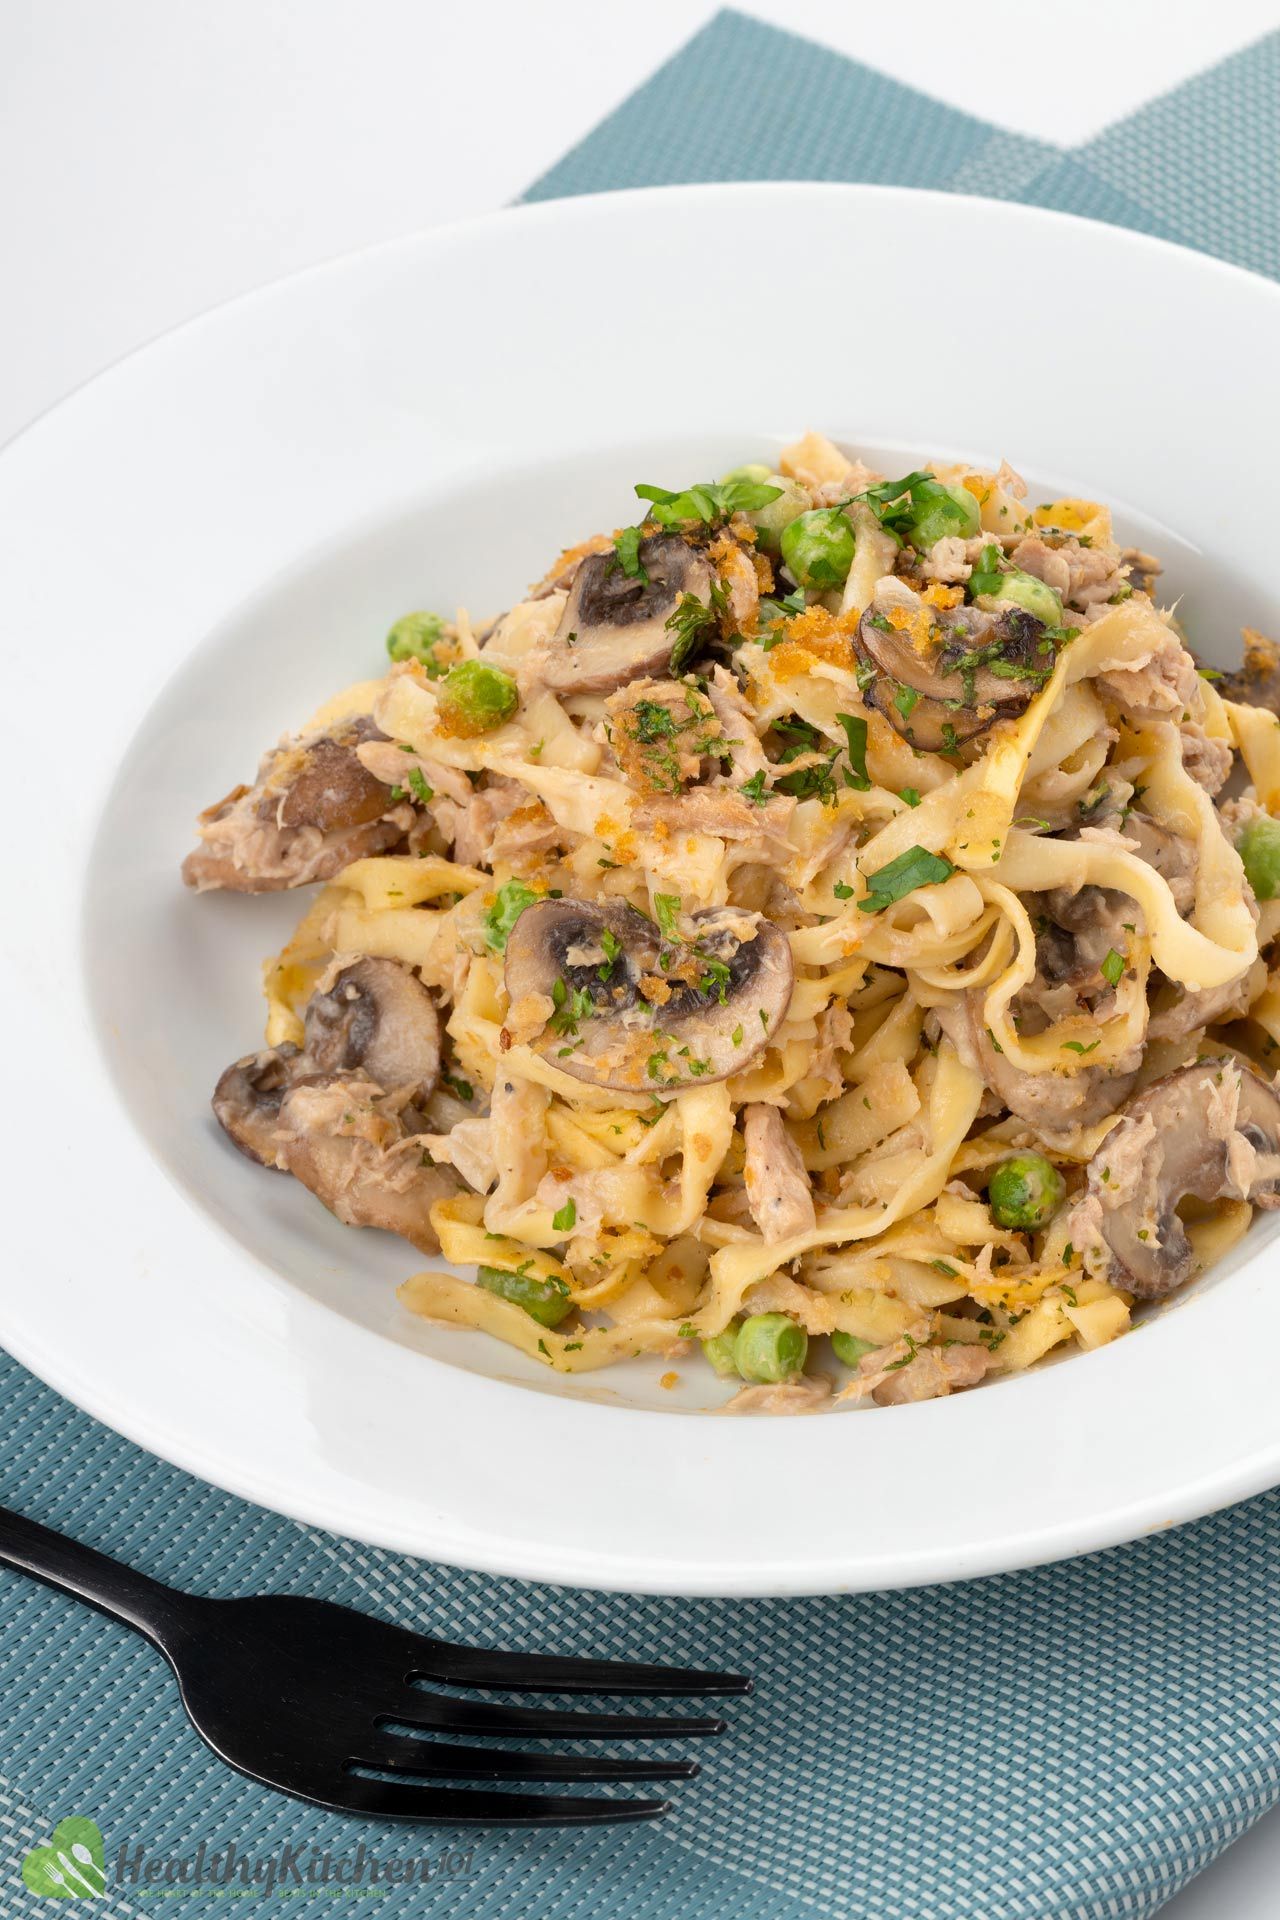 Is classic Tuna Noodle Casserole Healthy?